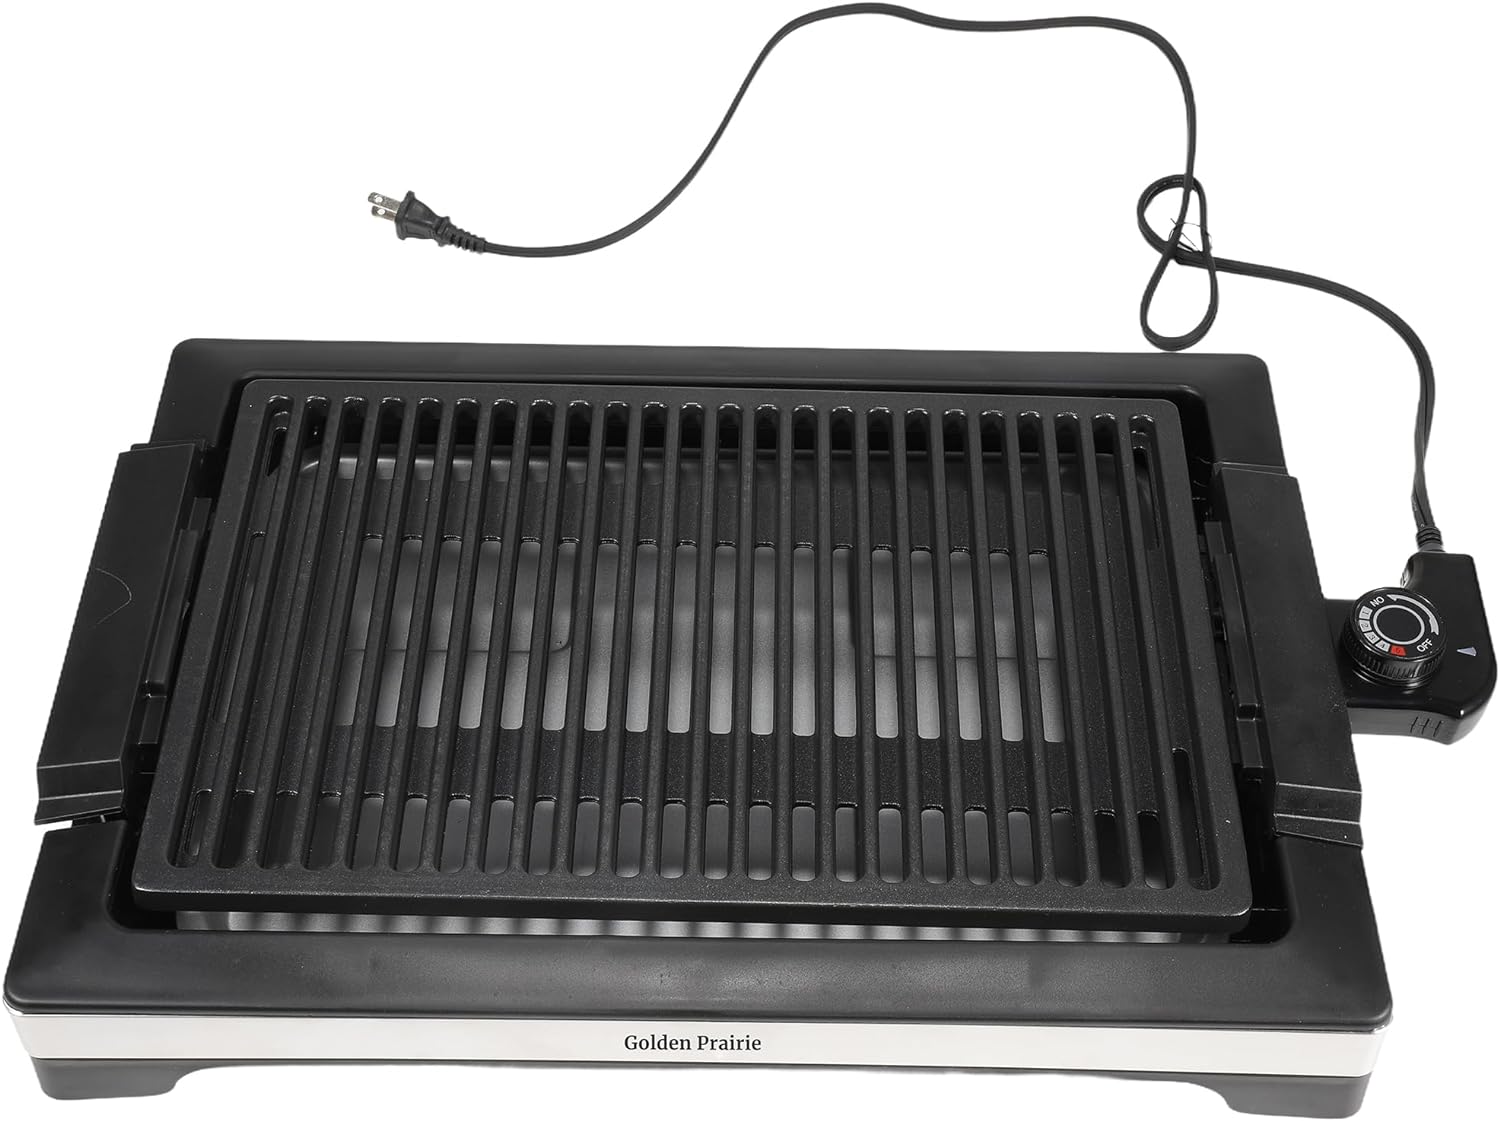 Electric Smokeless Indoor Grill, 1600W Fast Heat Up BBQ Grill, Nonstick Cooking Surface, 5 Levels Adjustable Temperature, Dishwasher Safe Removable Water Tray-Easy to Clean, Cool-touch Handles, Black